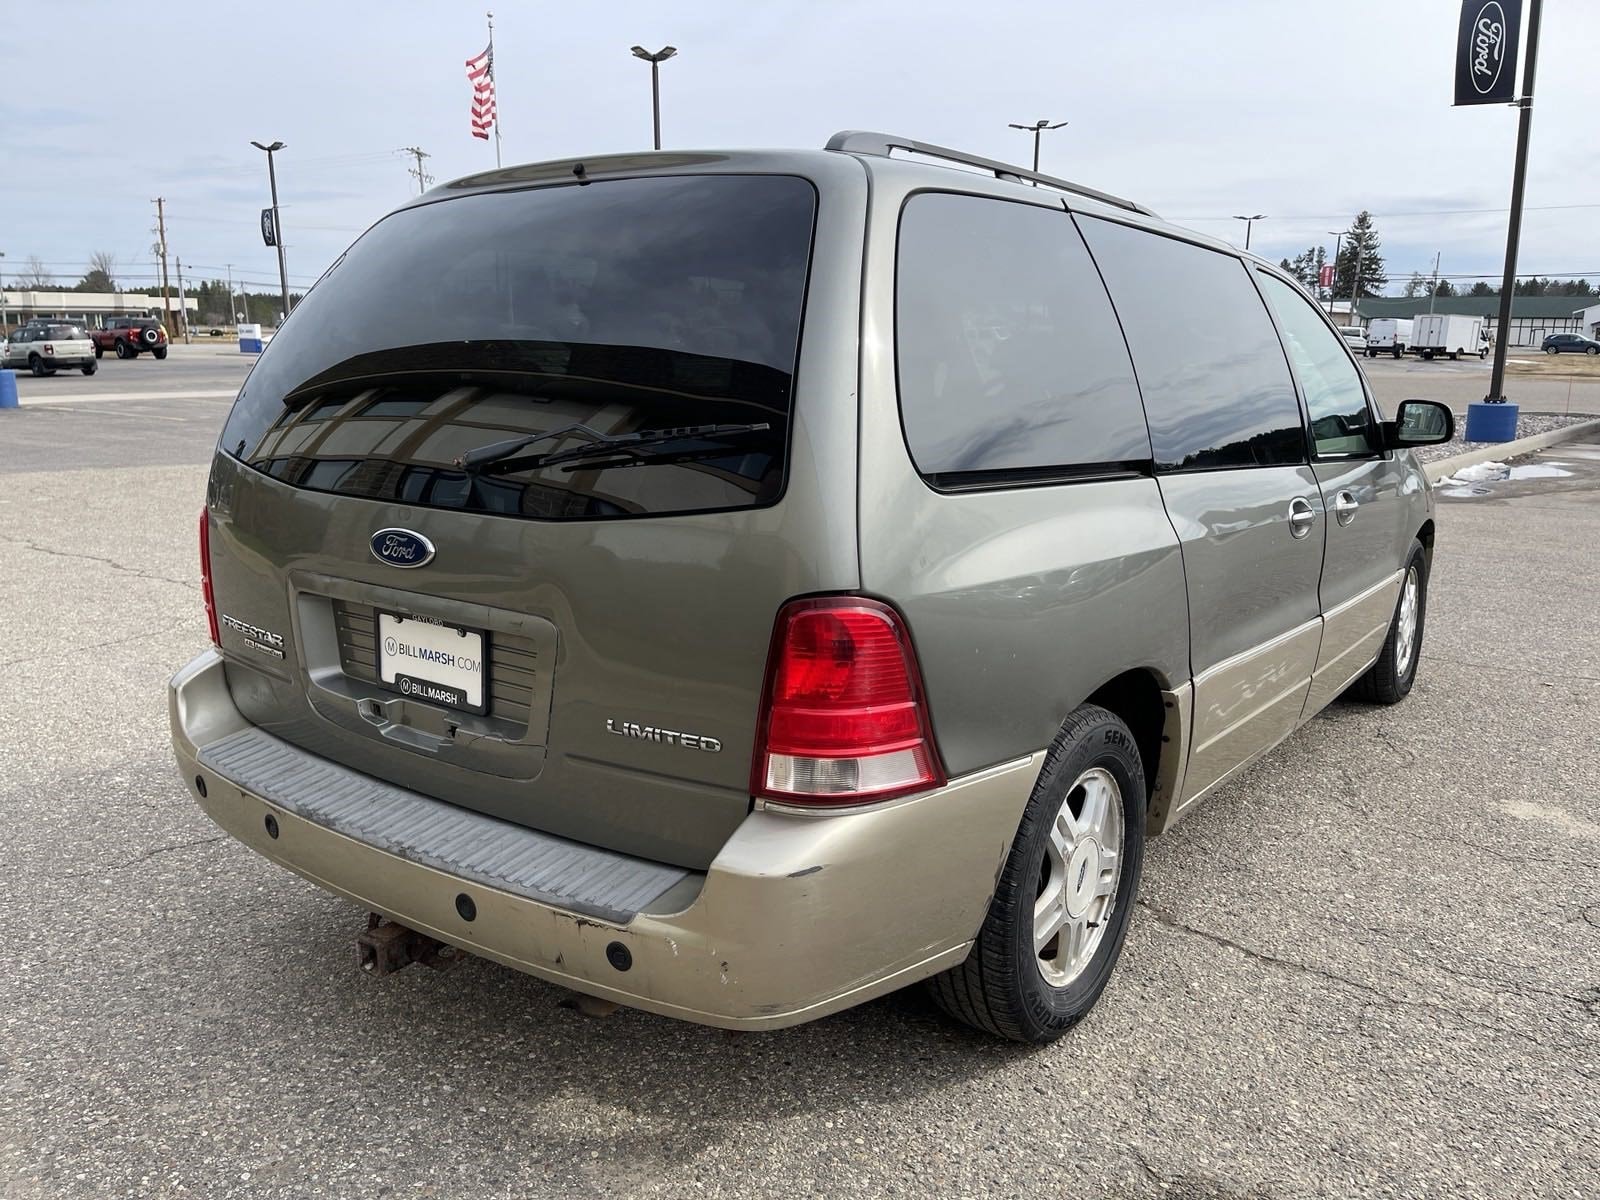 Used 2004 Ford Freestar Limited with VIN 2FMZA58294BA63010 for sale in Gaylord, MI